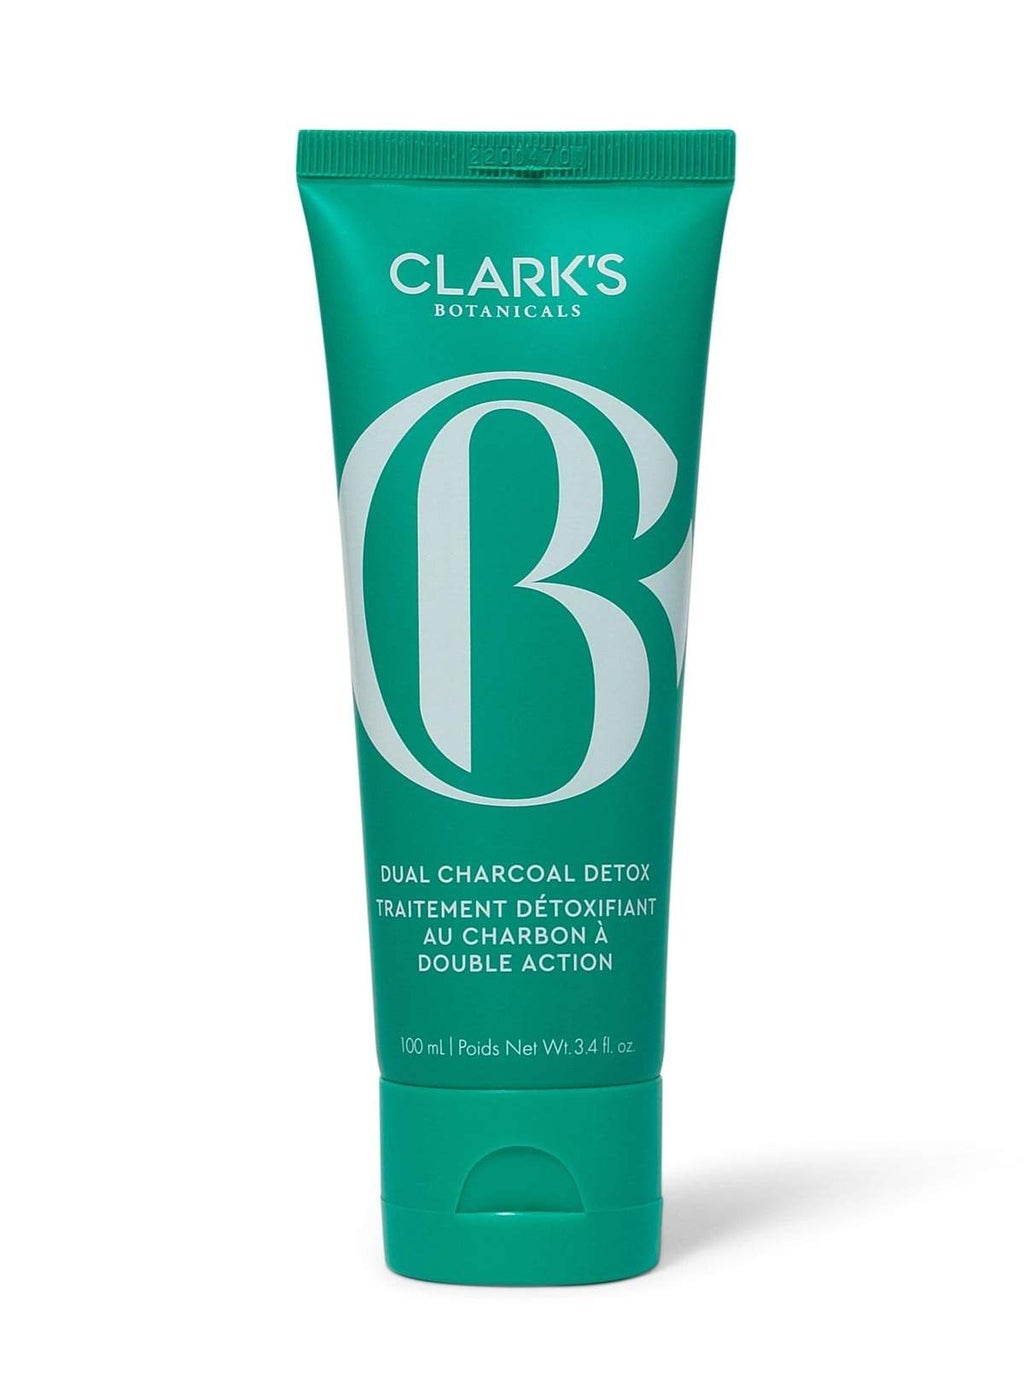 Keep your skin happy and glowing with Clark's Botanicals revitalizing products for your moisturizing, hydrating, and cleansing needs.